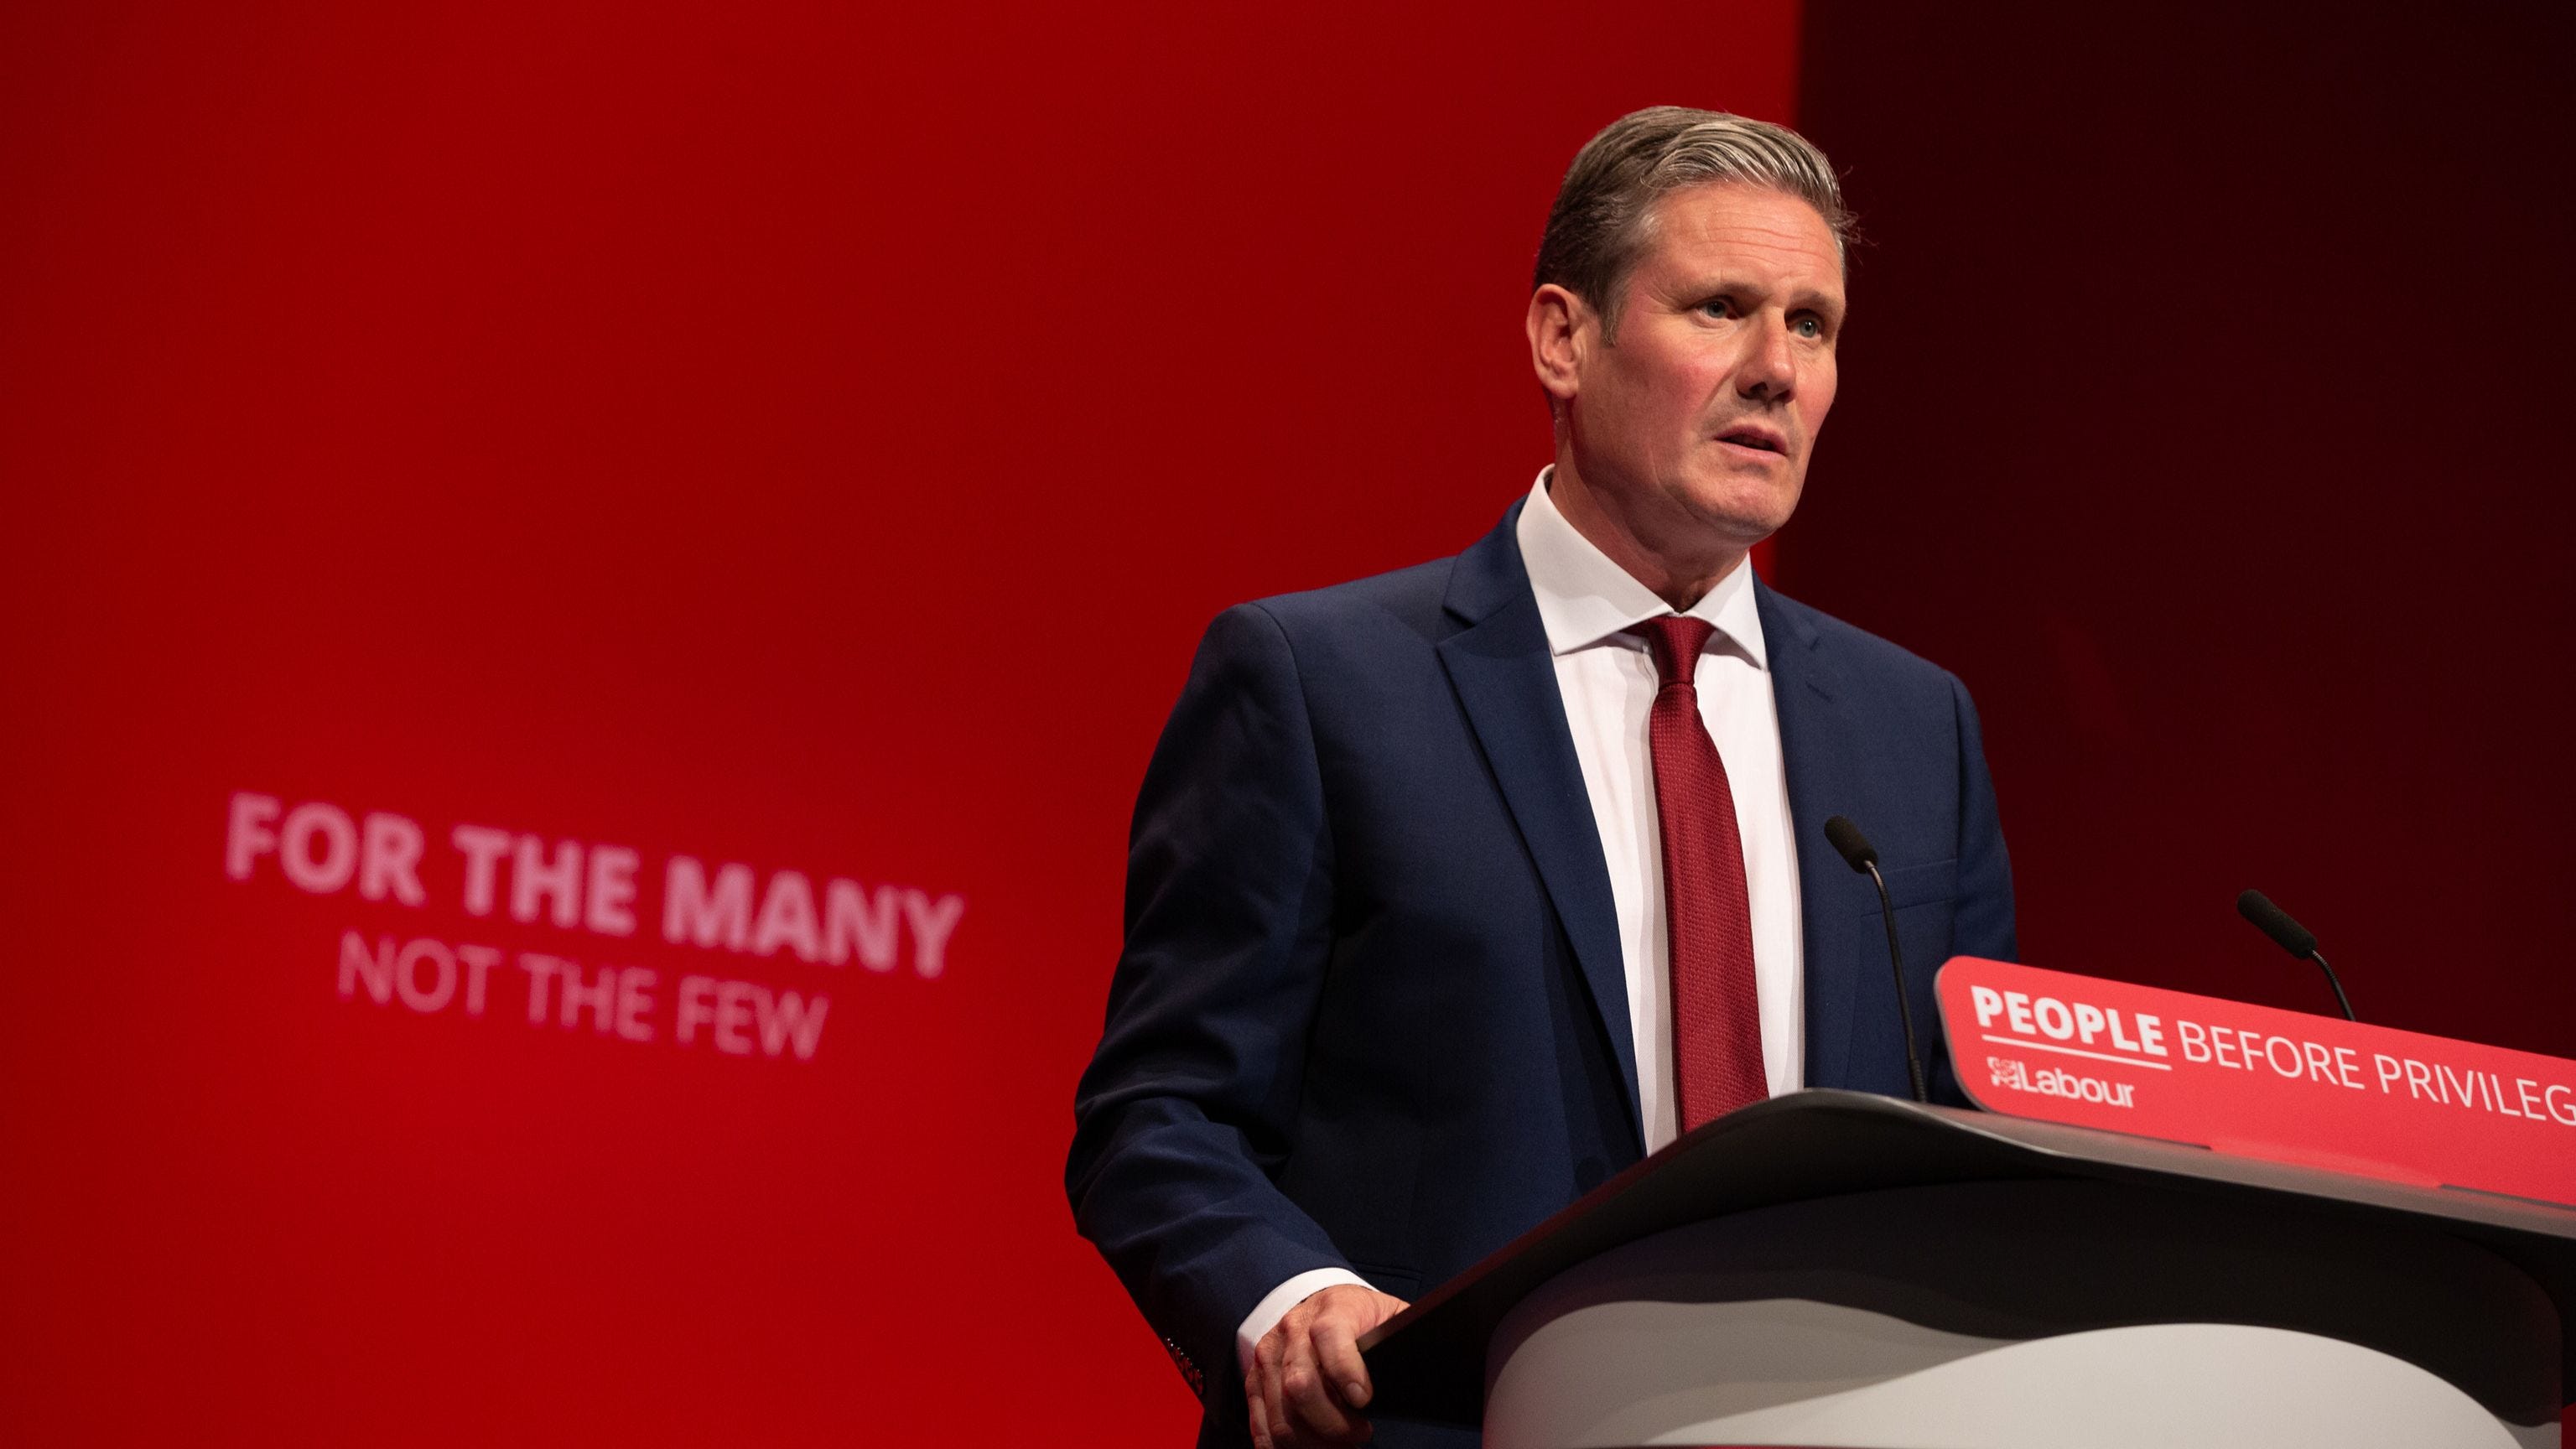 Keir Starmer speaking at the podium at Labour Party conference with red background showing slogan: For The Many Not The Few